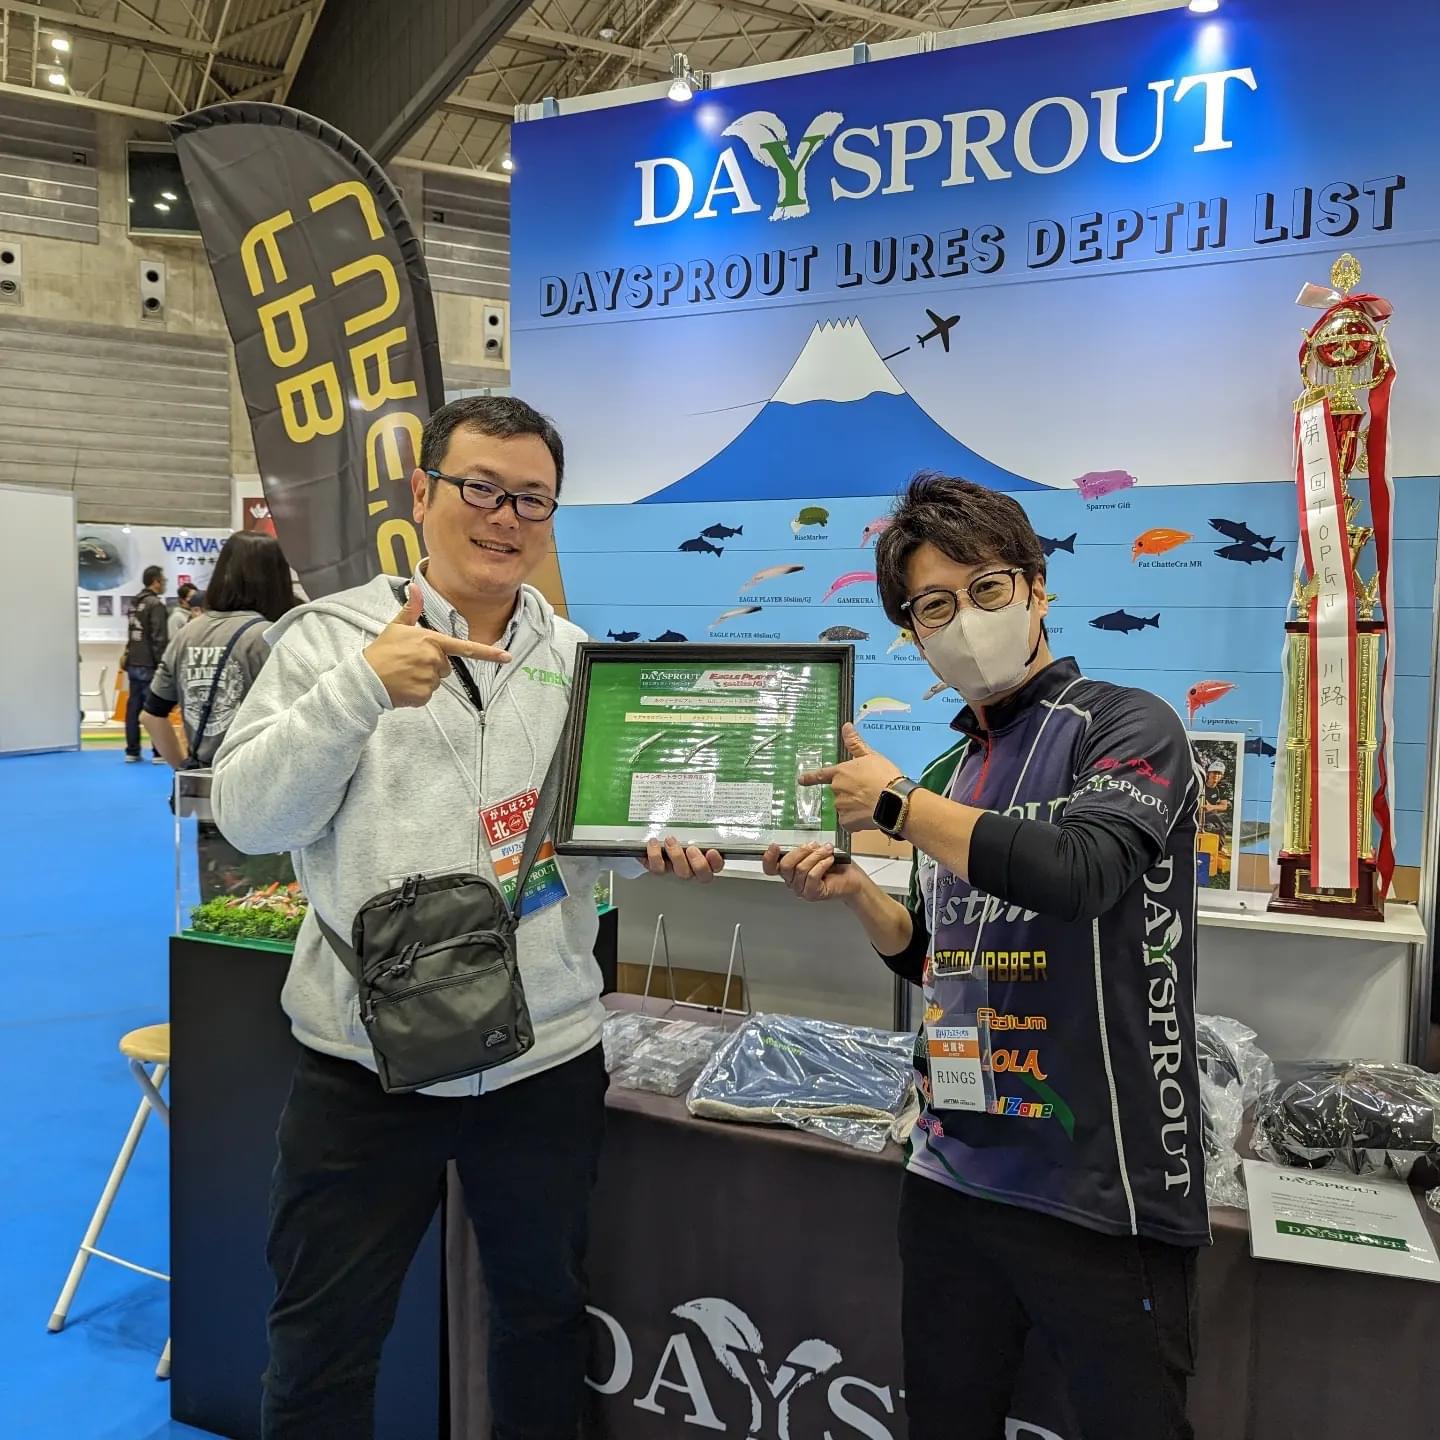 Daysprout lure depth list